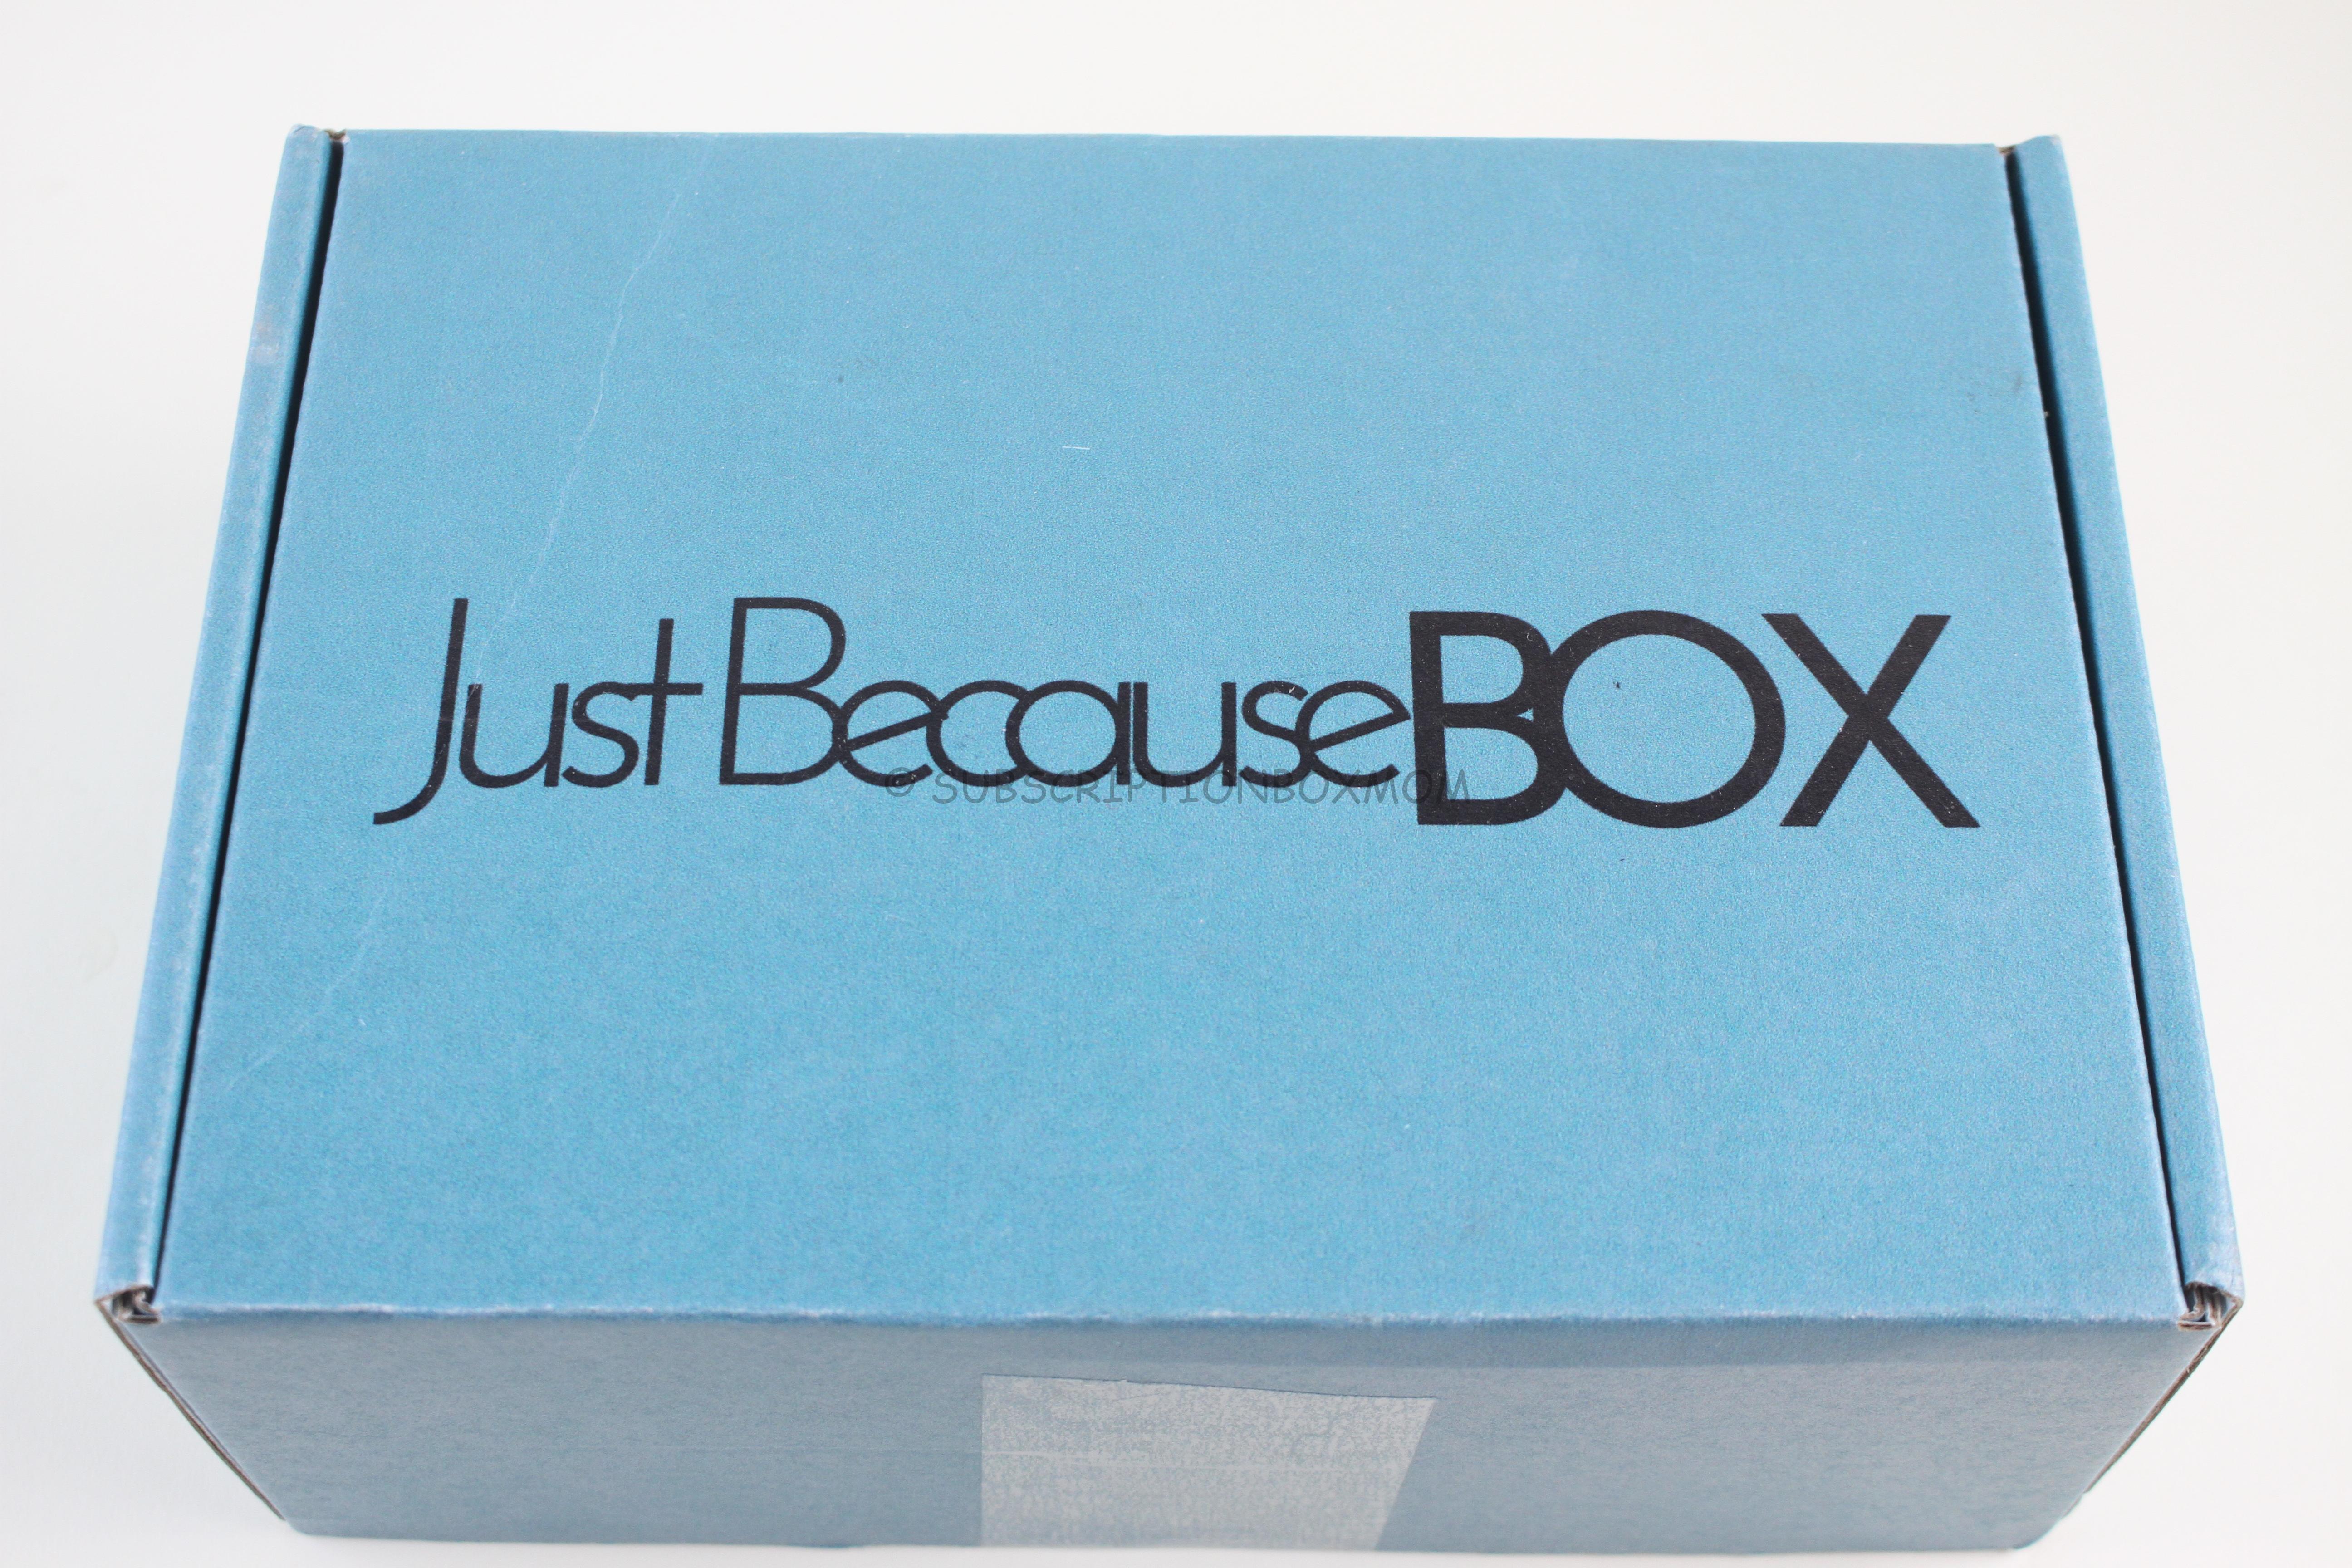 Just Box. Джаст бокс. March-Box 5. Welcome код